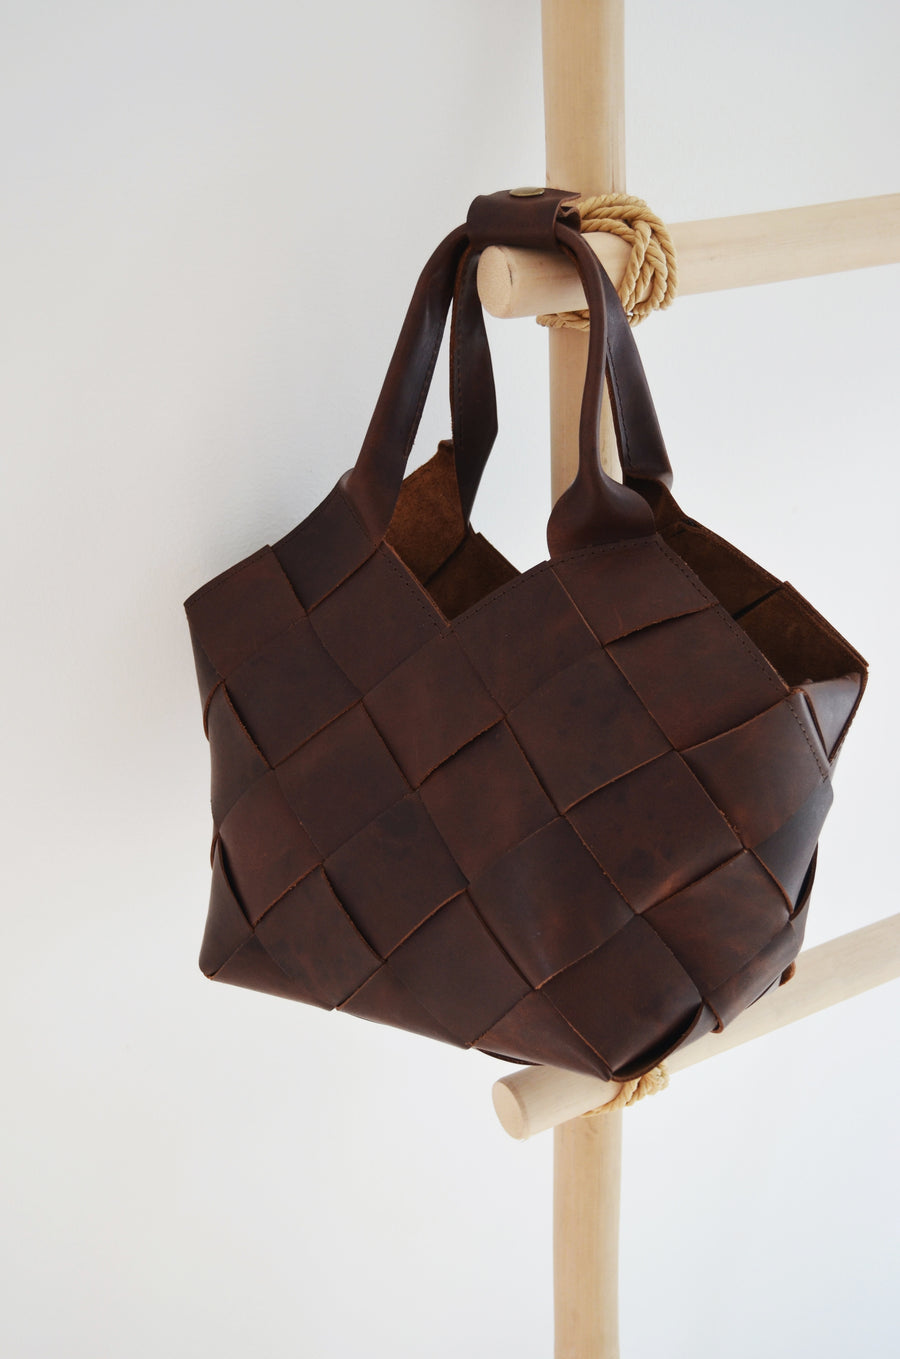 Woven Bag Limited Edition - Dark Brown